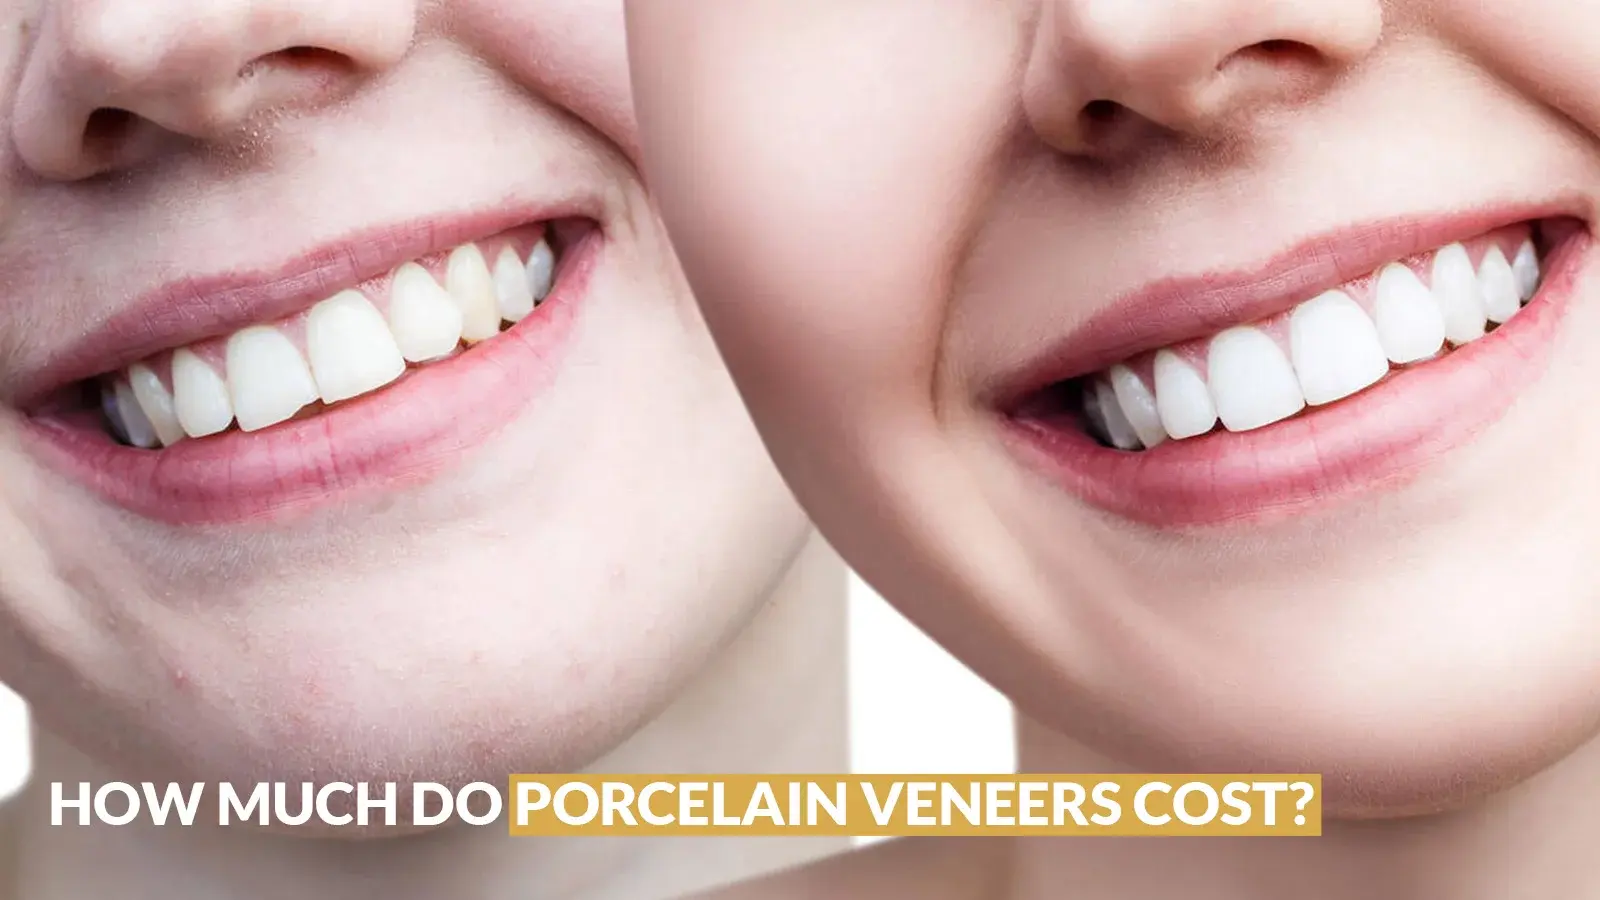 How Much do Porcelain Veneers Cost?